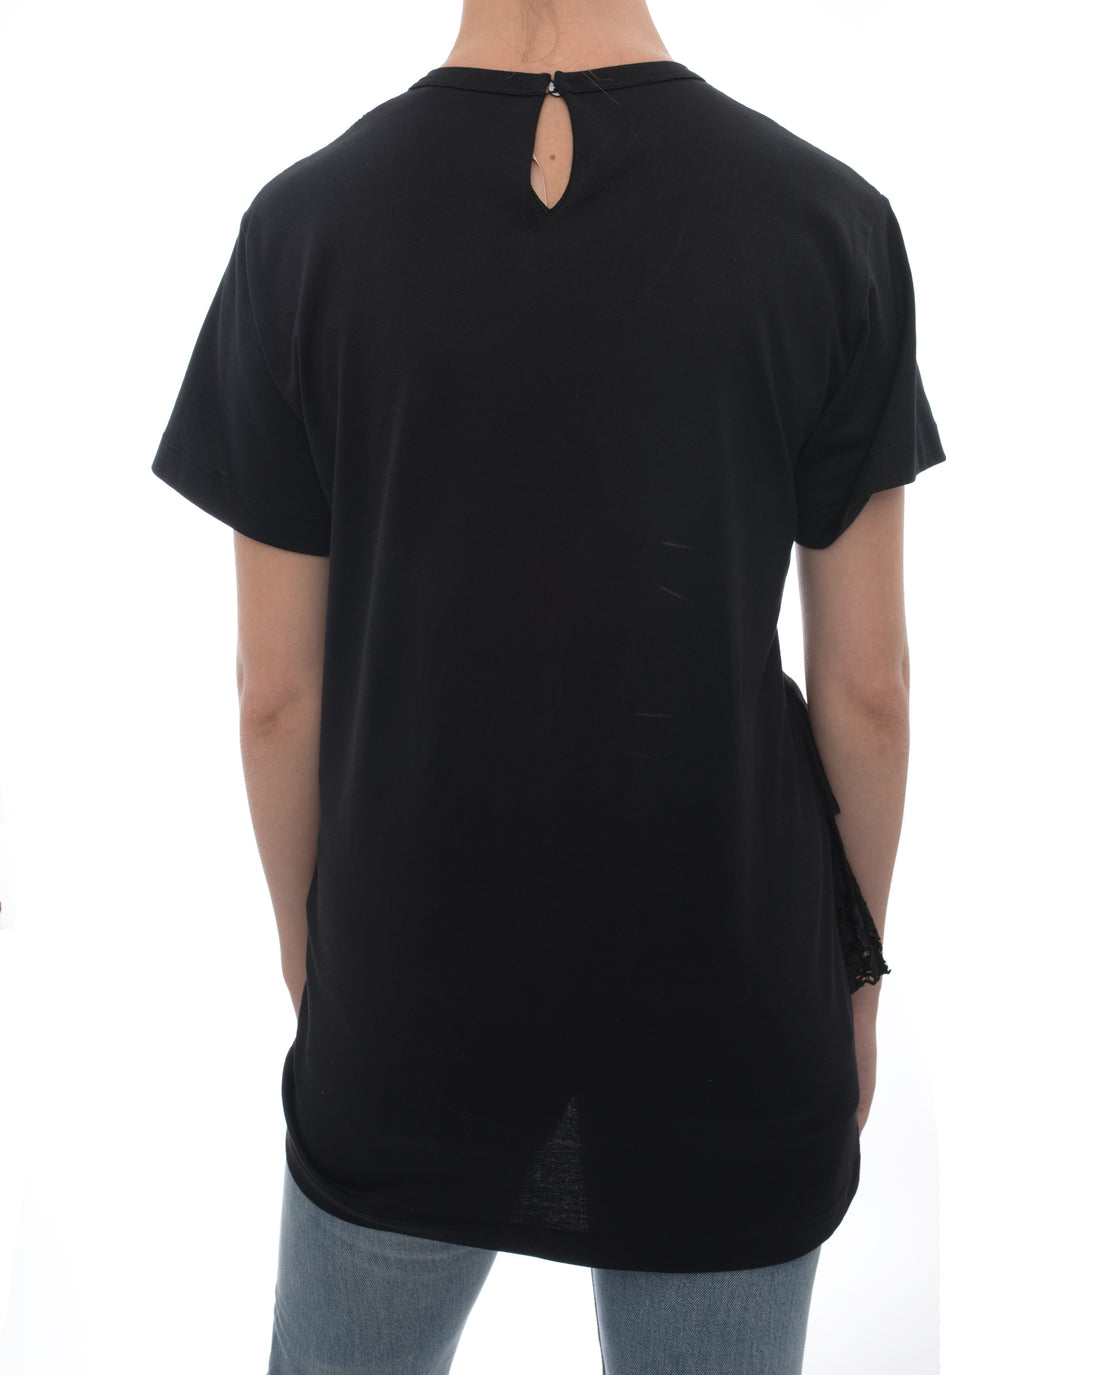 No. 21 Black T-Shirt with Broderie Anglaise Inset - 6